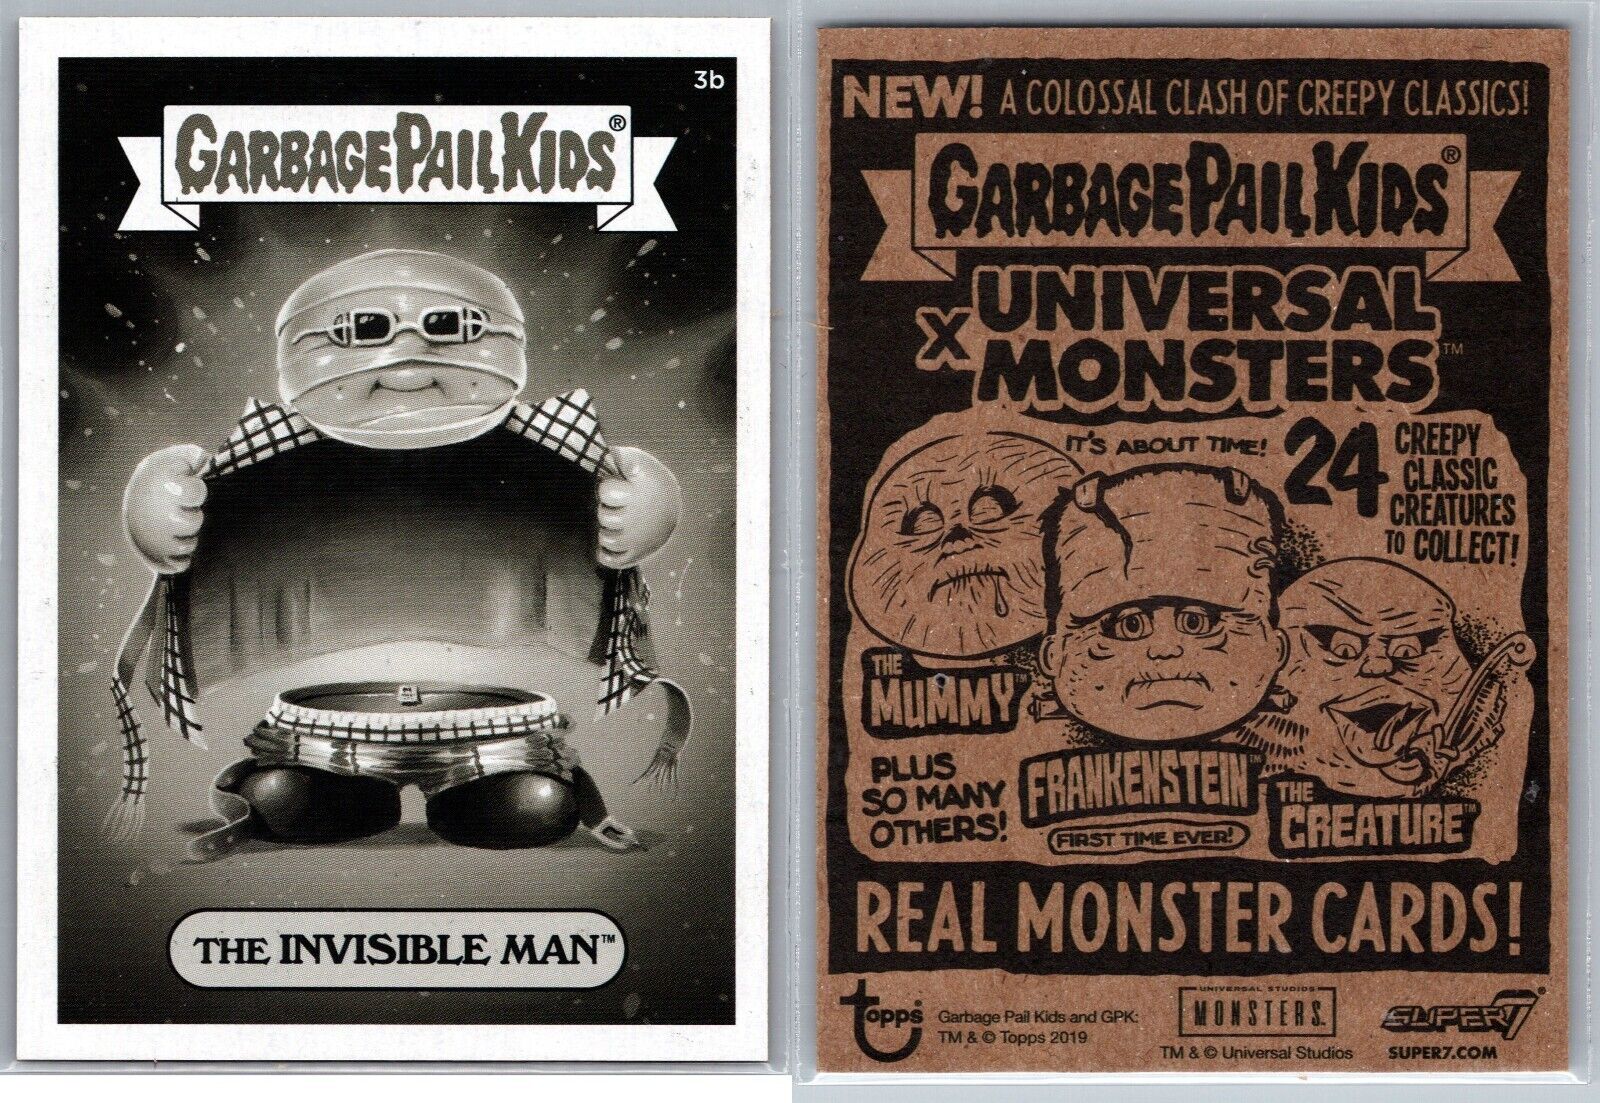 The Invisible Man Garbage Pail Kids GPK Universal Monsters Spoof Card